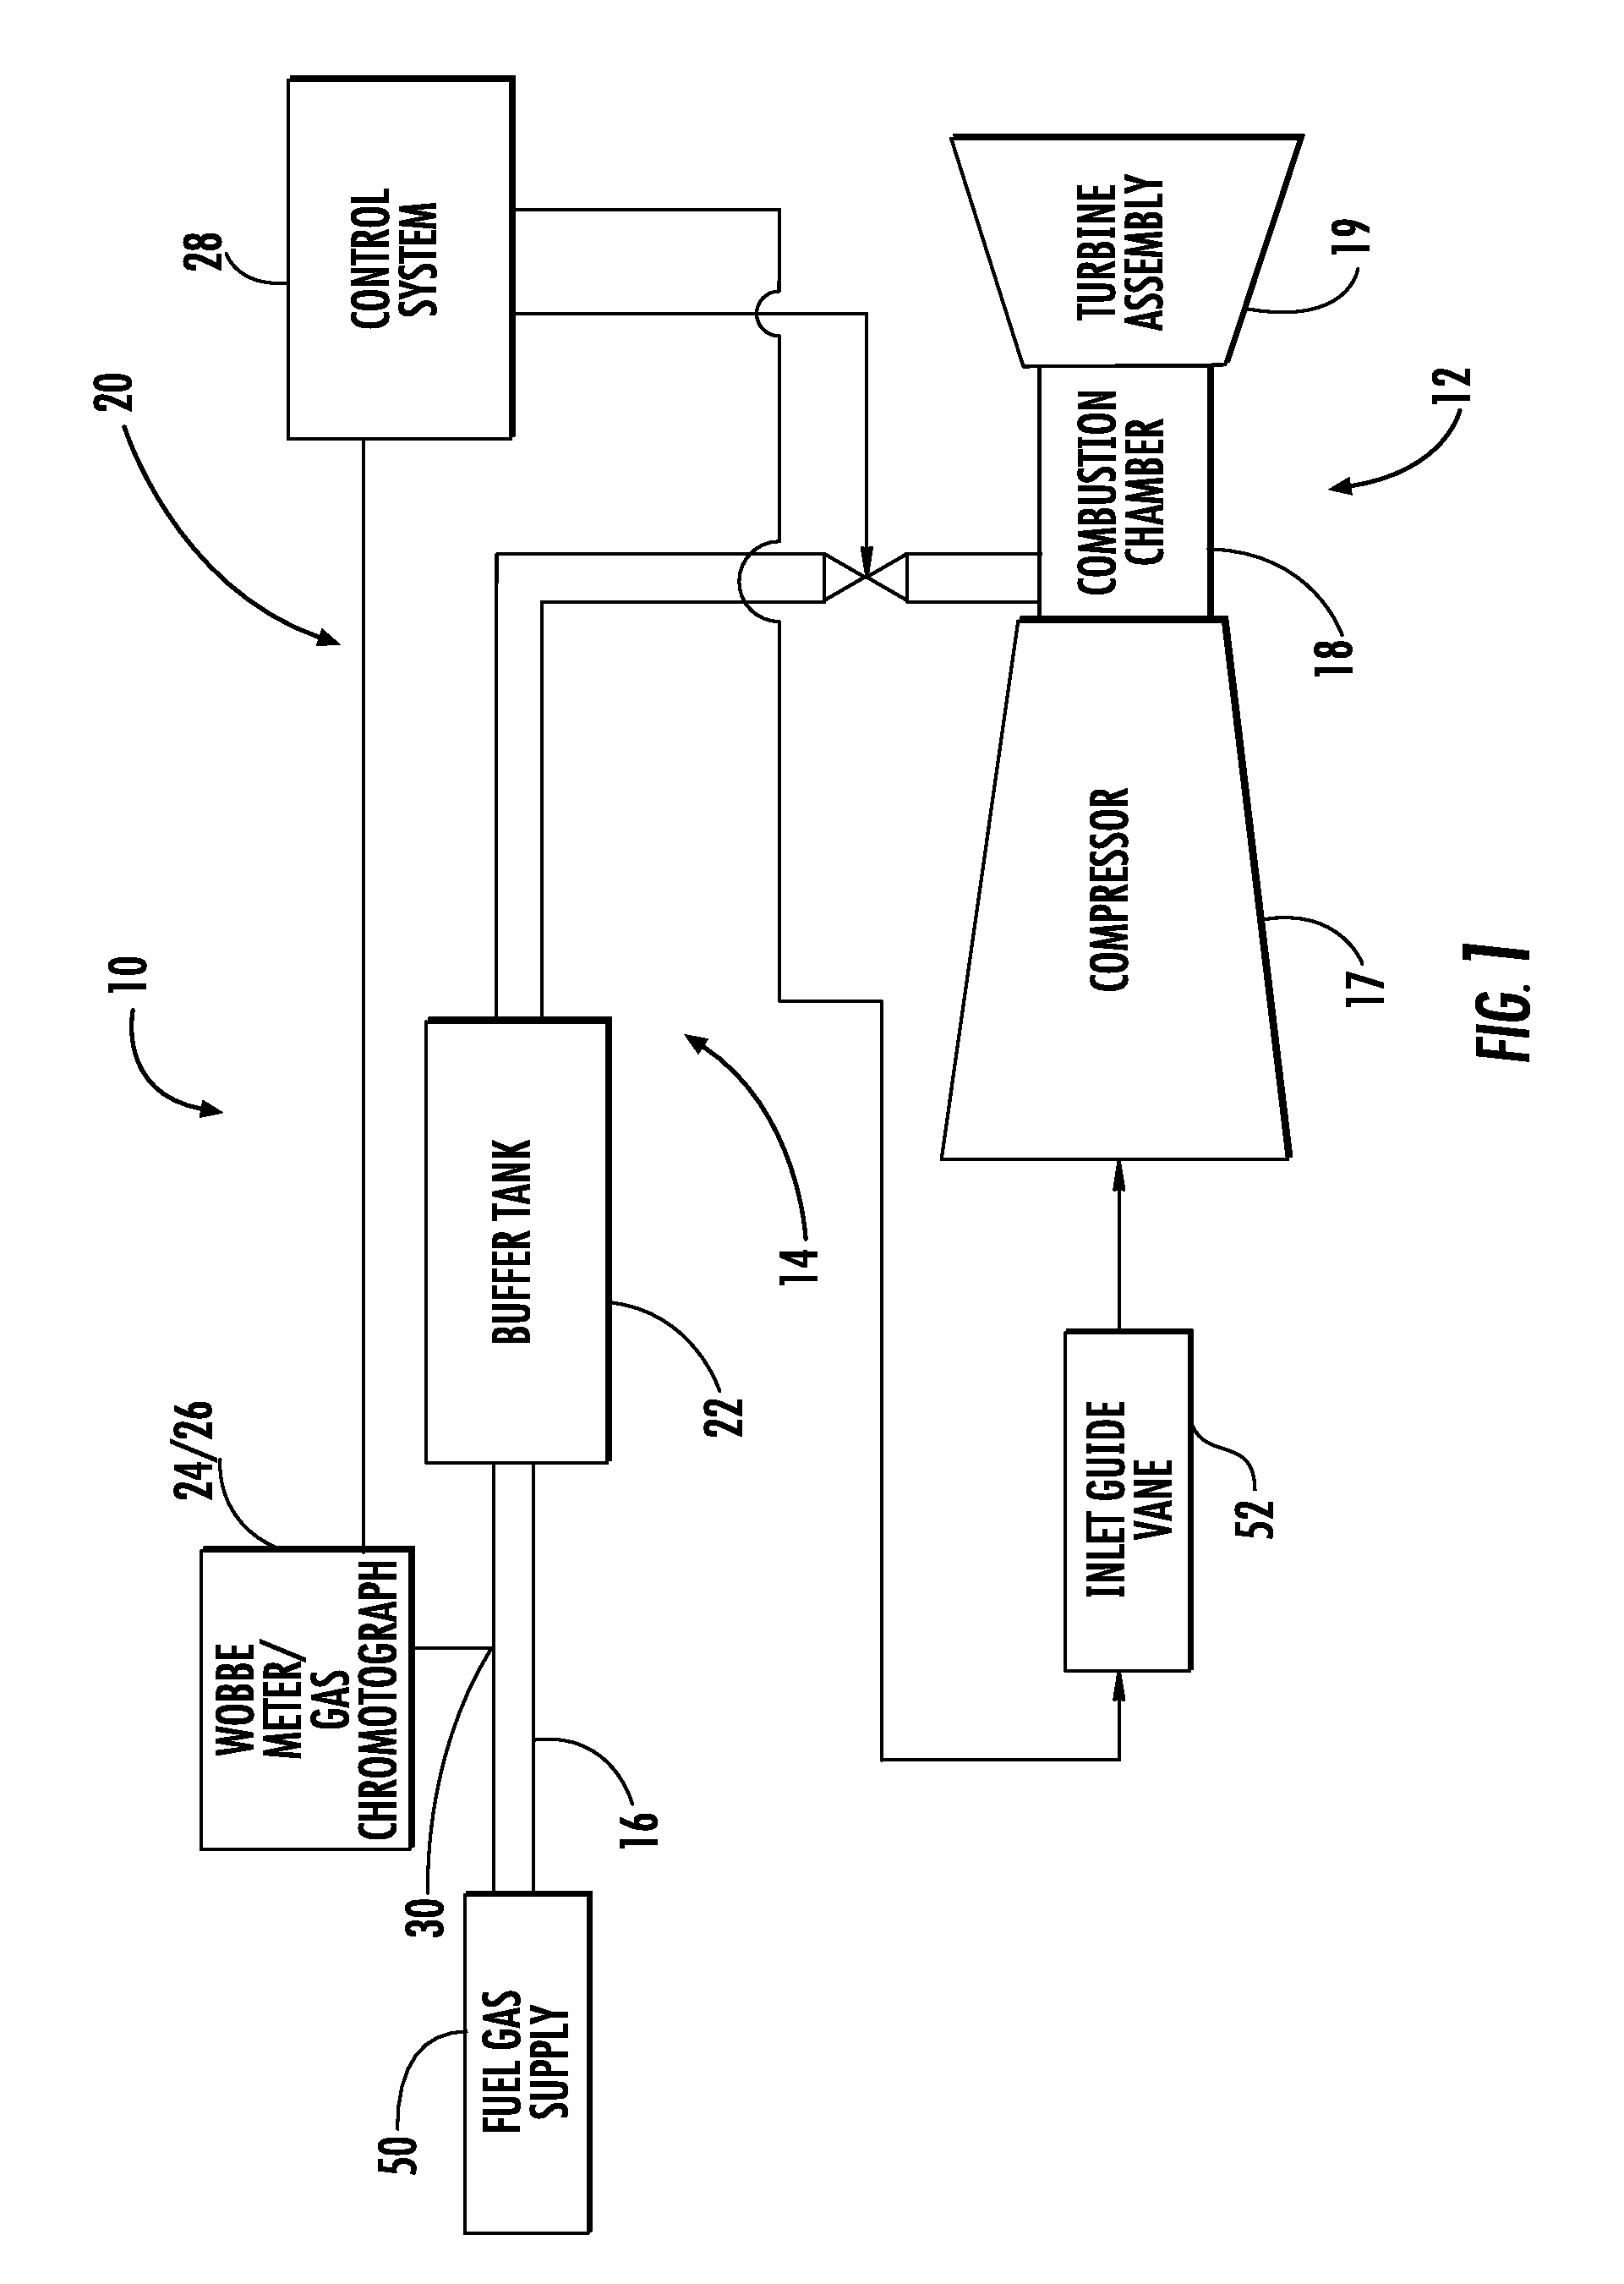 Integrated fuel gas characterization system